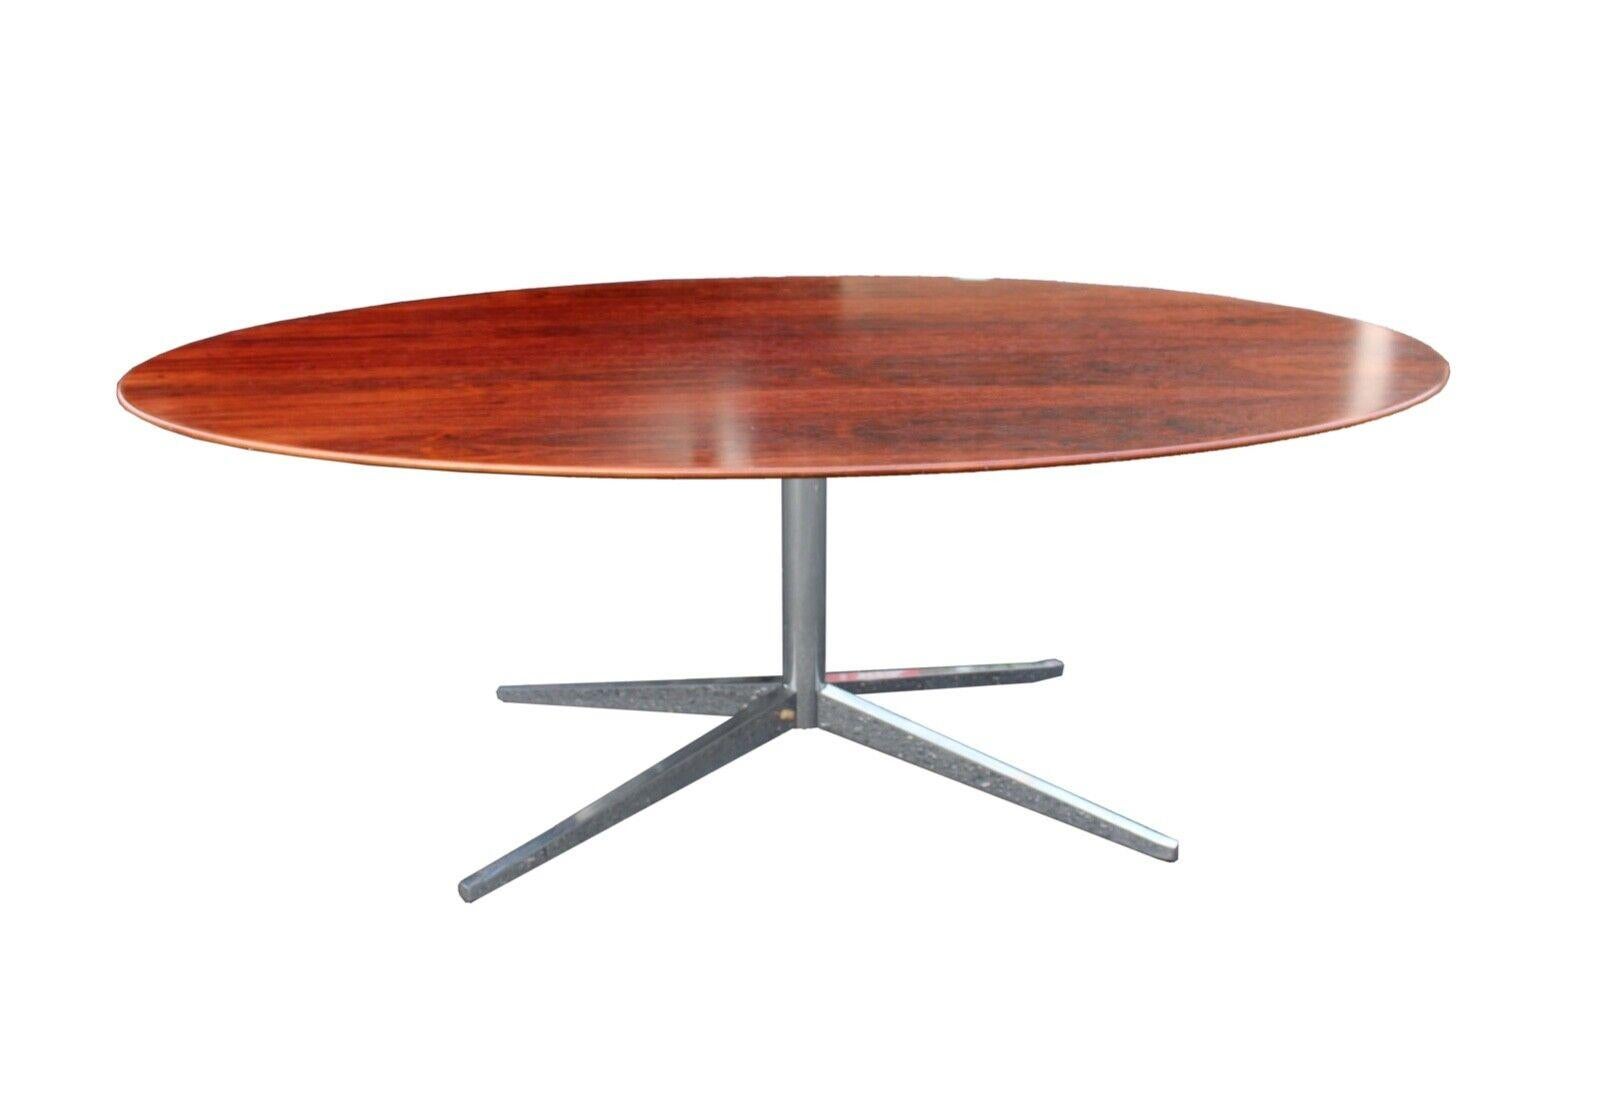 This gorgeous Knoll rosewood oval table at 78